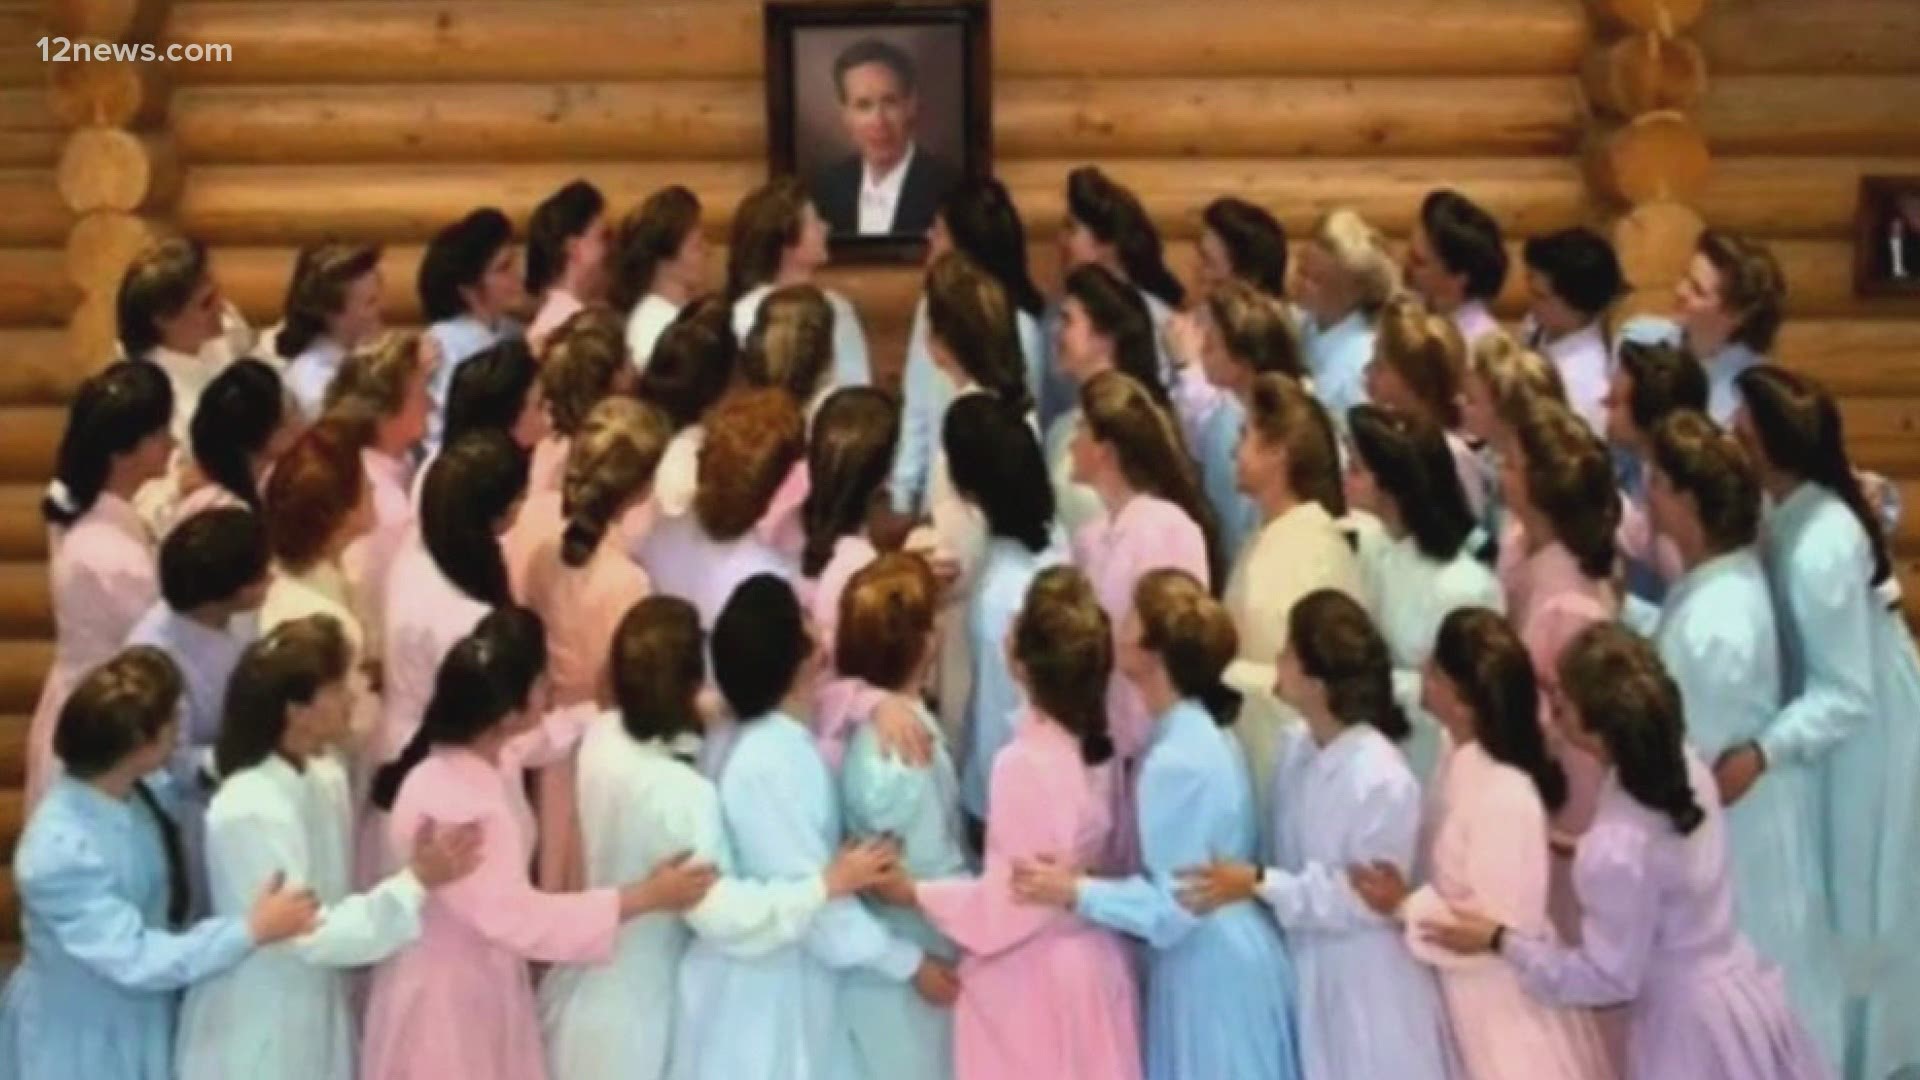 Decker was polygamist cult leader Warren Jeffs, 65th wife before they divorced. She was forced to marry him at the age of 18.